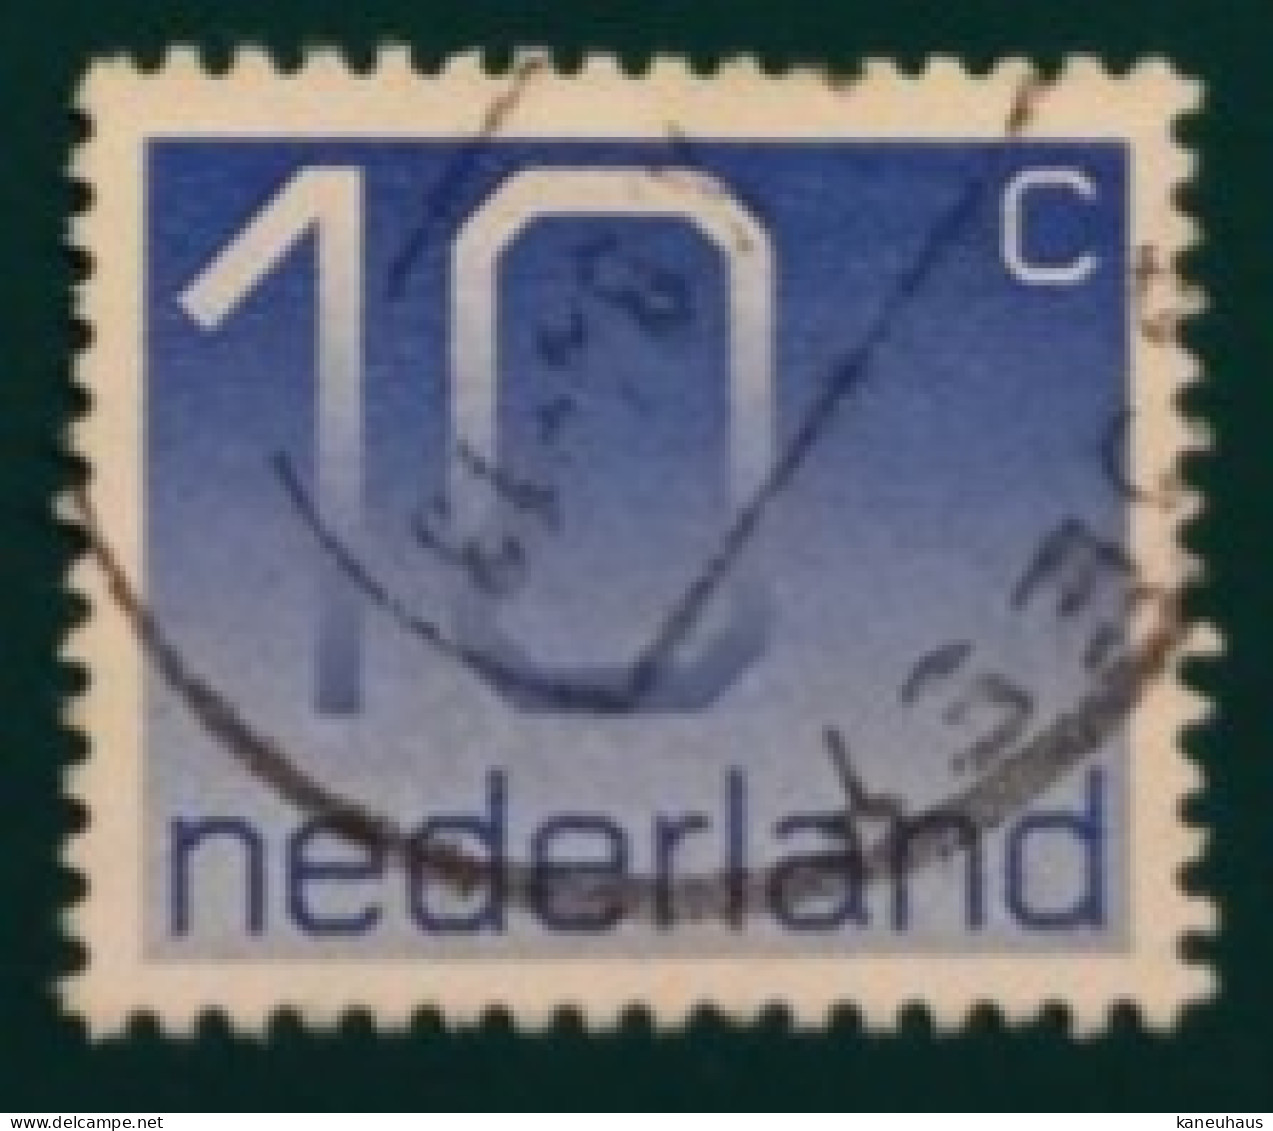 1976 Michel-Nr. 1066A Gestempelt (DNH) - Used Stamps